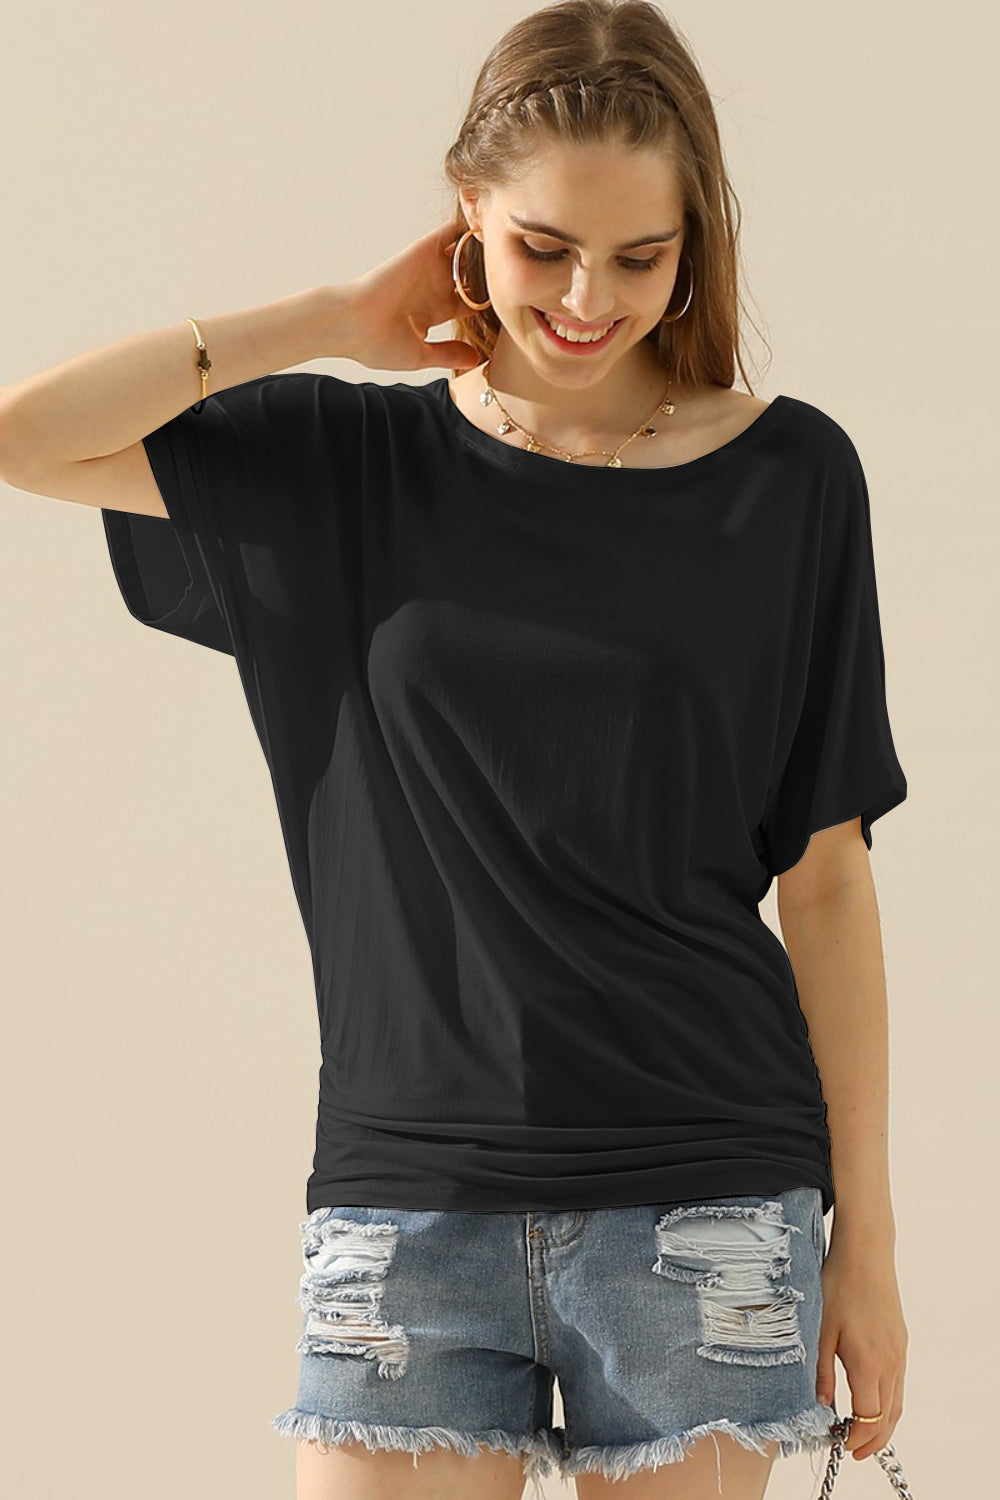 Ninexis Boat Neck Short Sleeve Ruched Side Top - BLACK / S - TOPS - Mixed